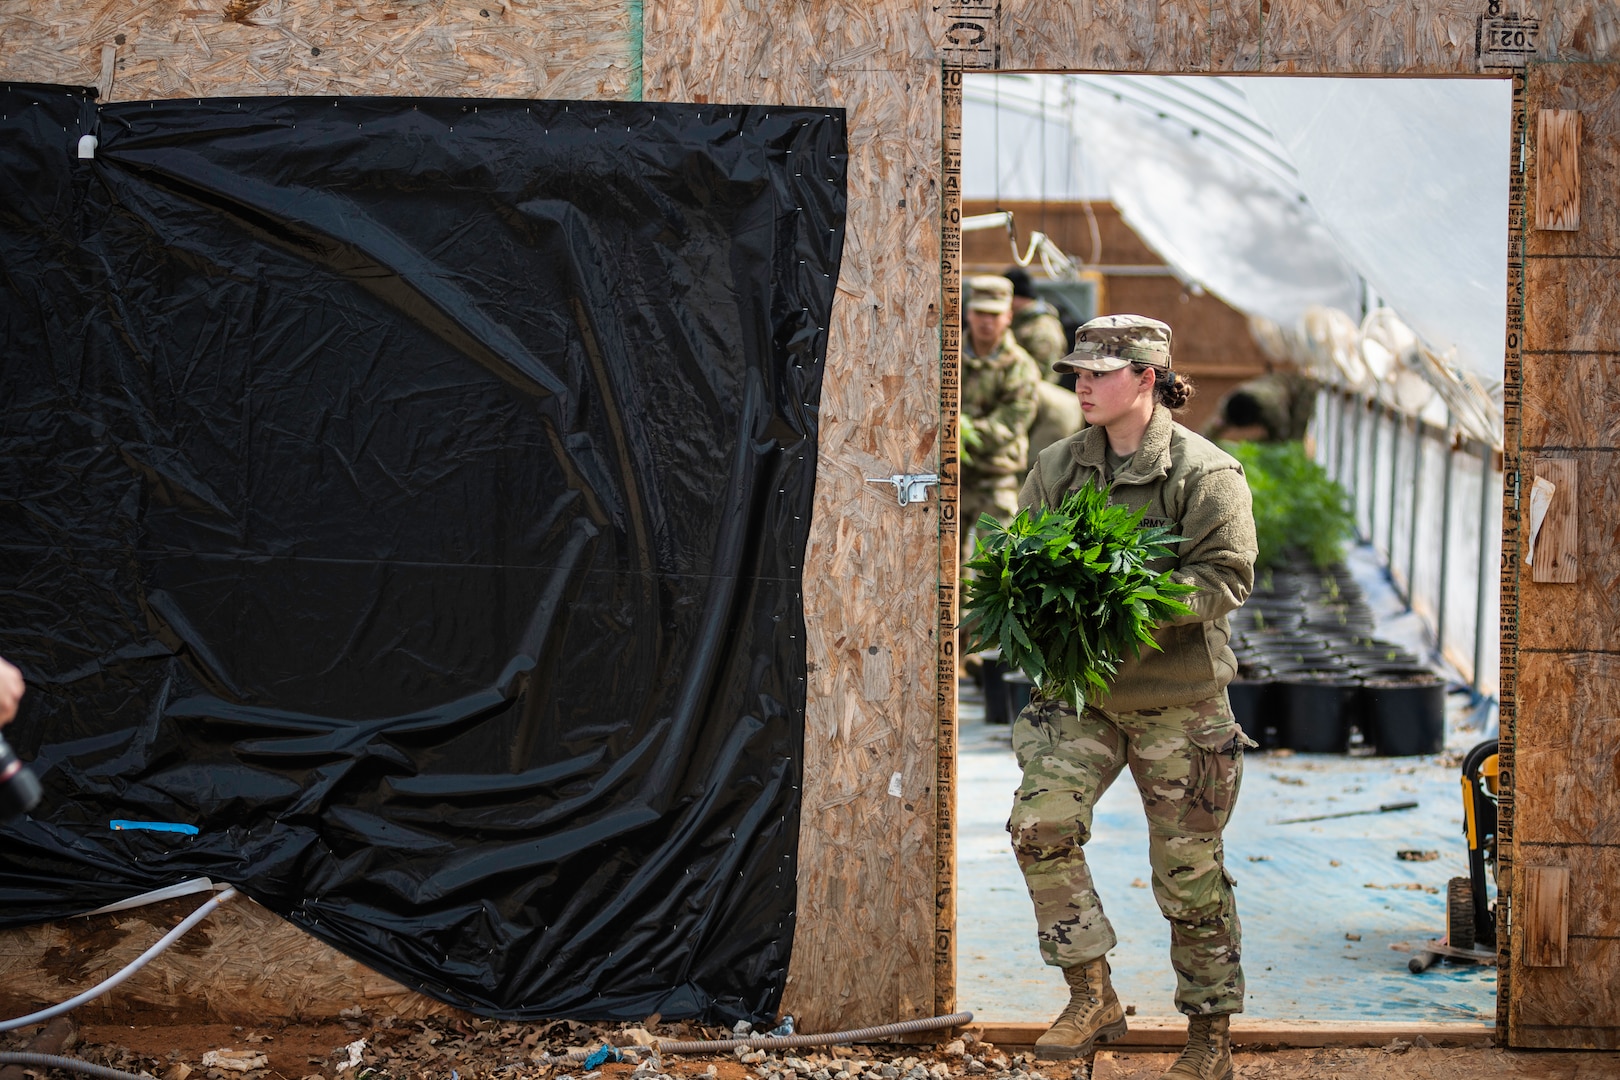 Oklahoma Army National Guardsmen remove marijuana debris from a grow house during a massive multi-agency operation targeting criminal marijuana growth and trafficking in the southern part of Oklahoma, Feb. 22, 2022. The Oklahoma National Guard answered the call to support our state with approximately 150 Guard members, 14 dump trucks, UH-60 Black Hawk and UH-72 Lakota helicopters, and numerous other heavy machinery to support the operation. (Oklahoma National Guard photo by Sgt. 1st Class Mireille Merilice-Roberts)